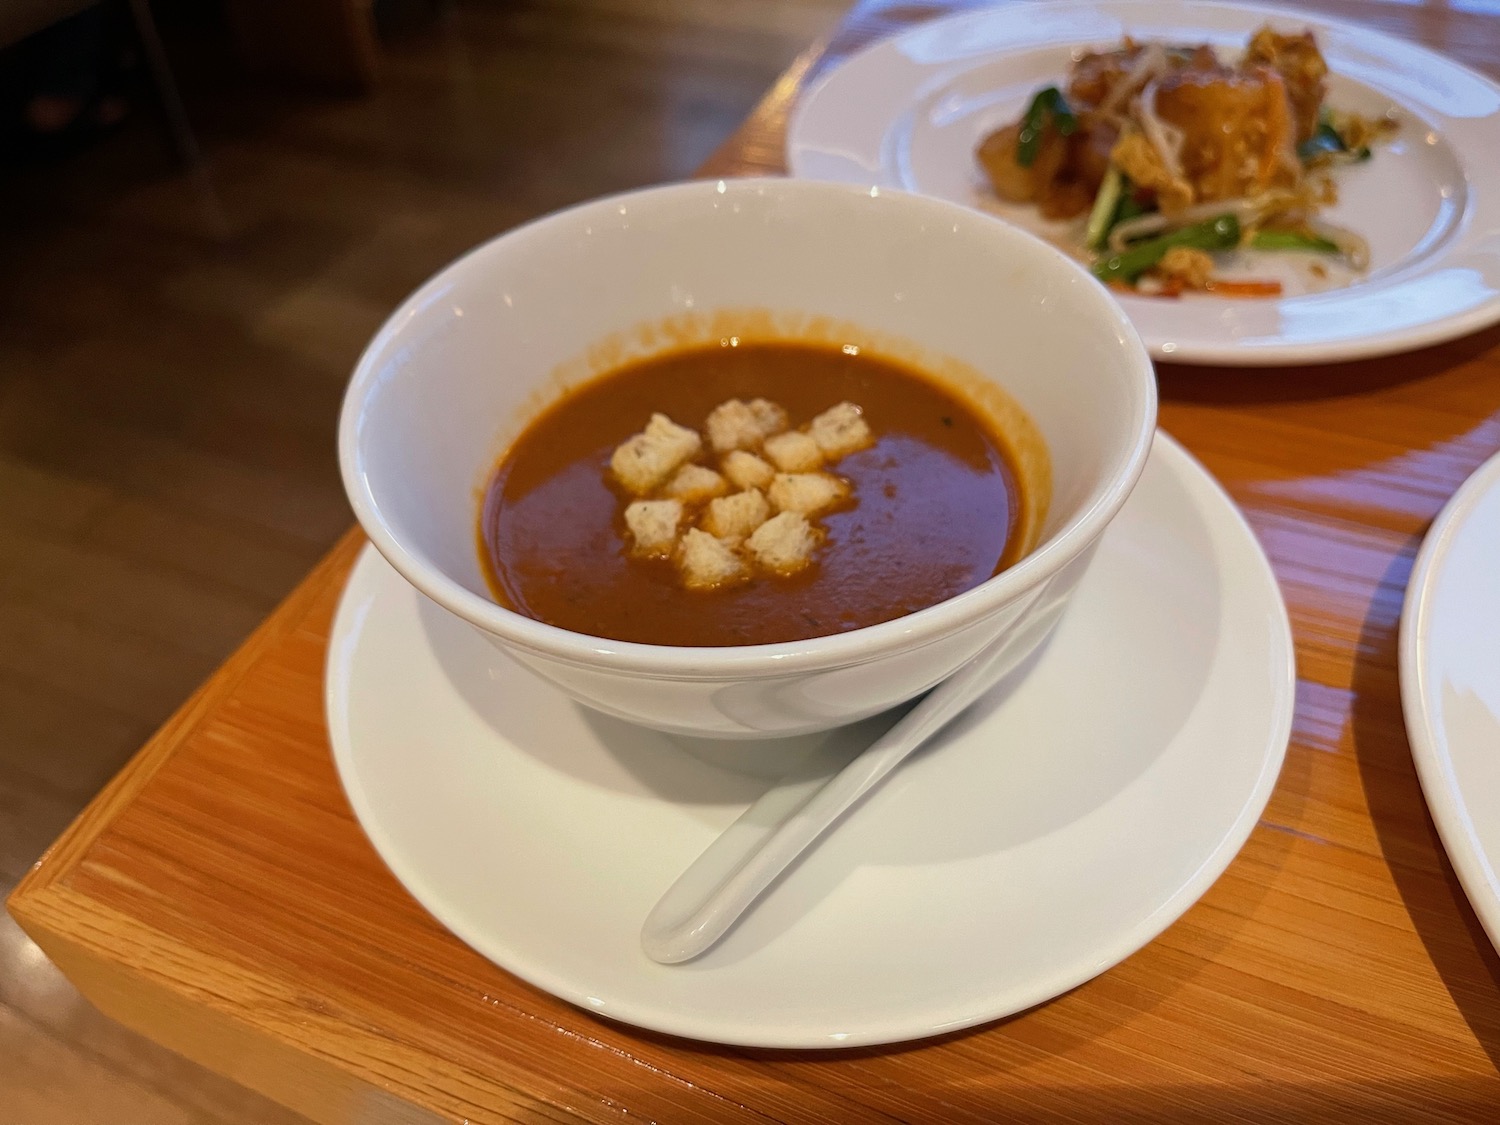 a bowl of soup with croutons on top of a plate of food